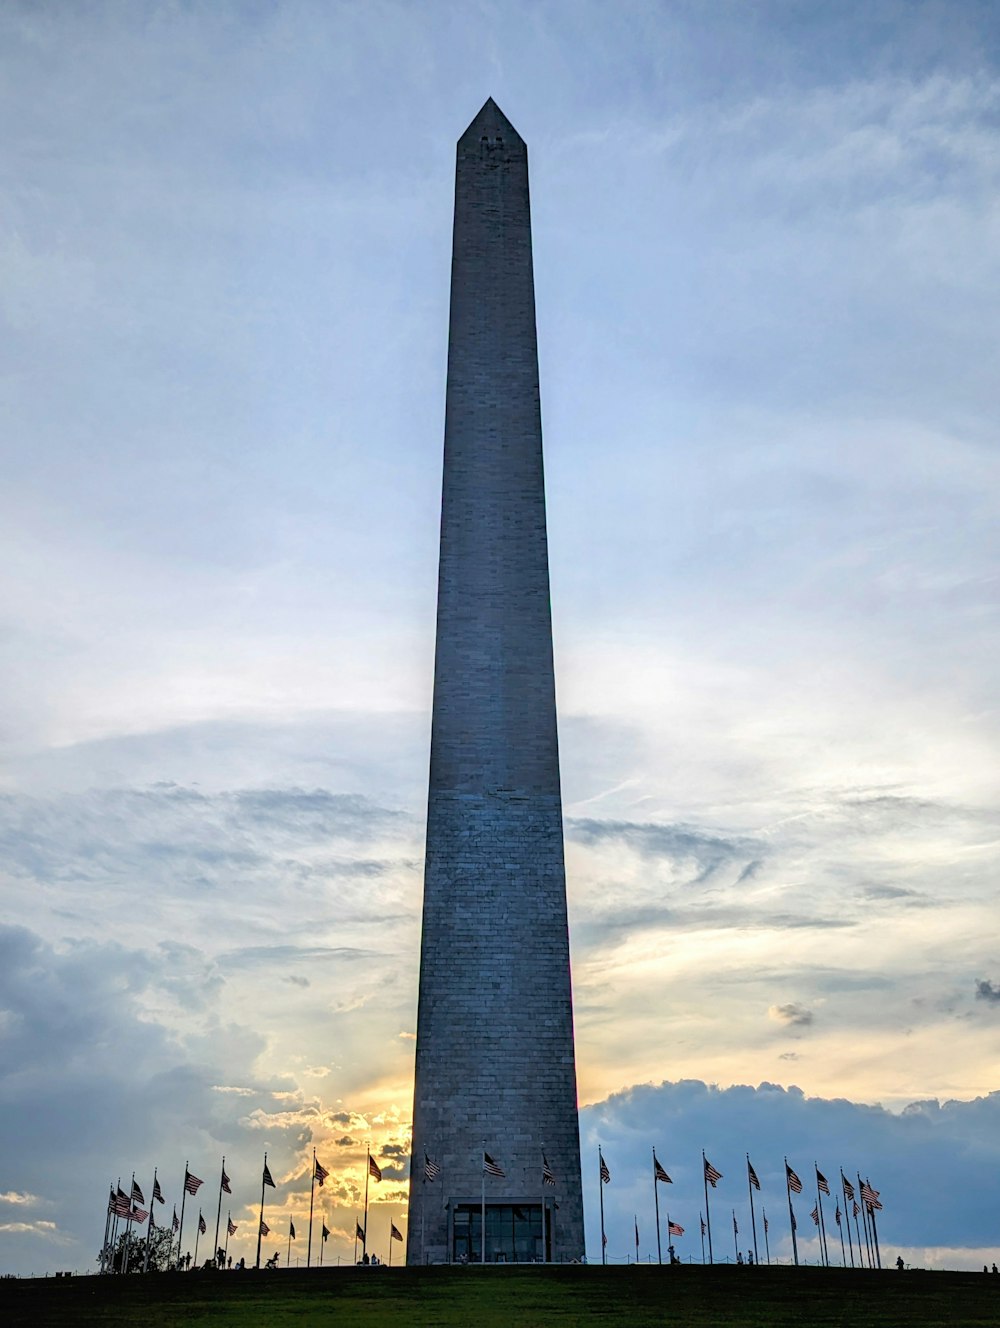 the washington monument is silhouetted against a cloudy sky